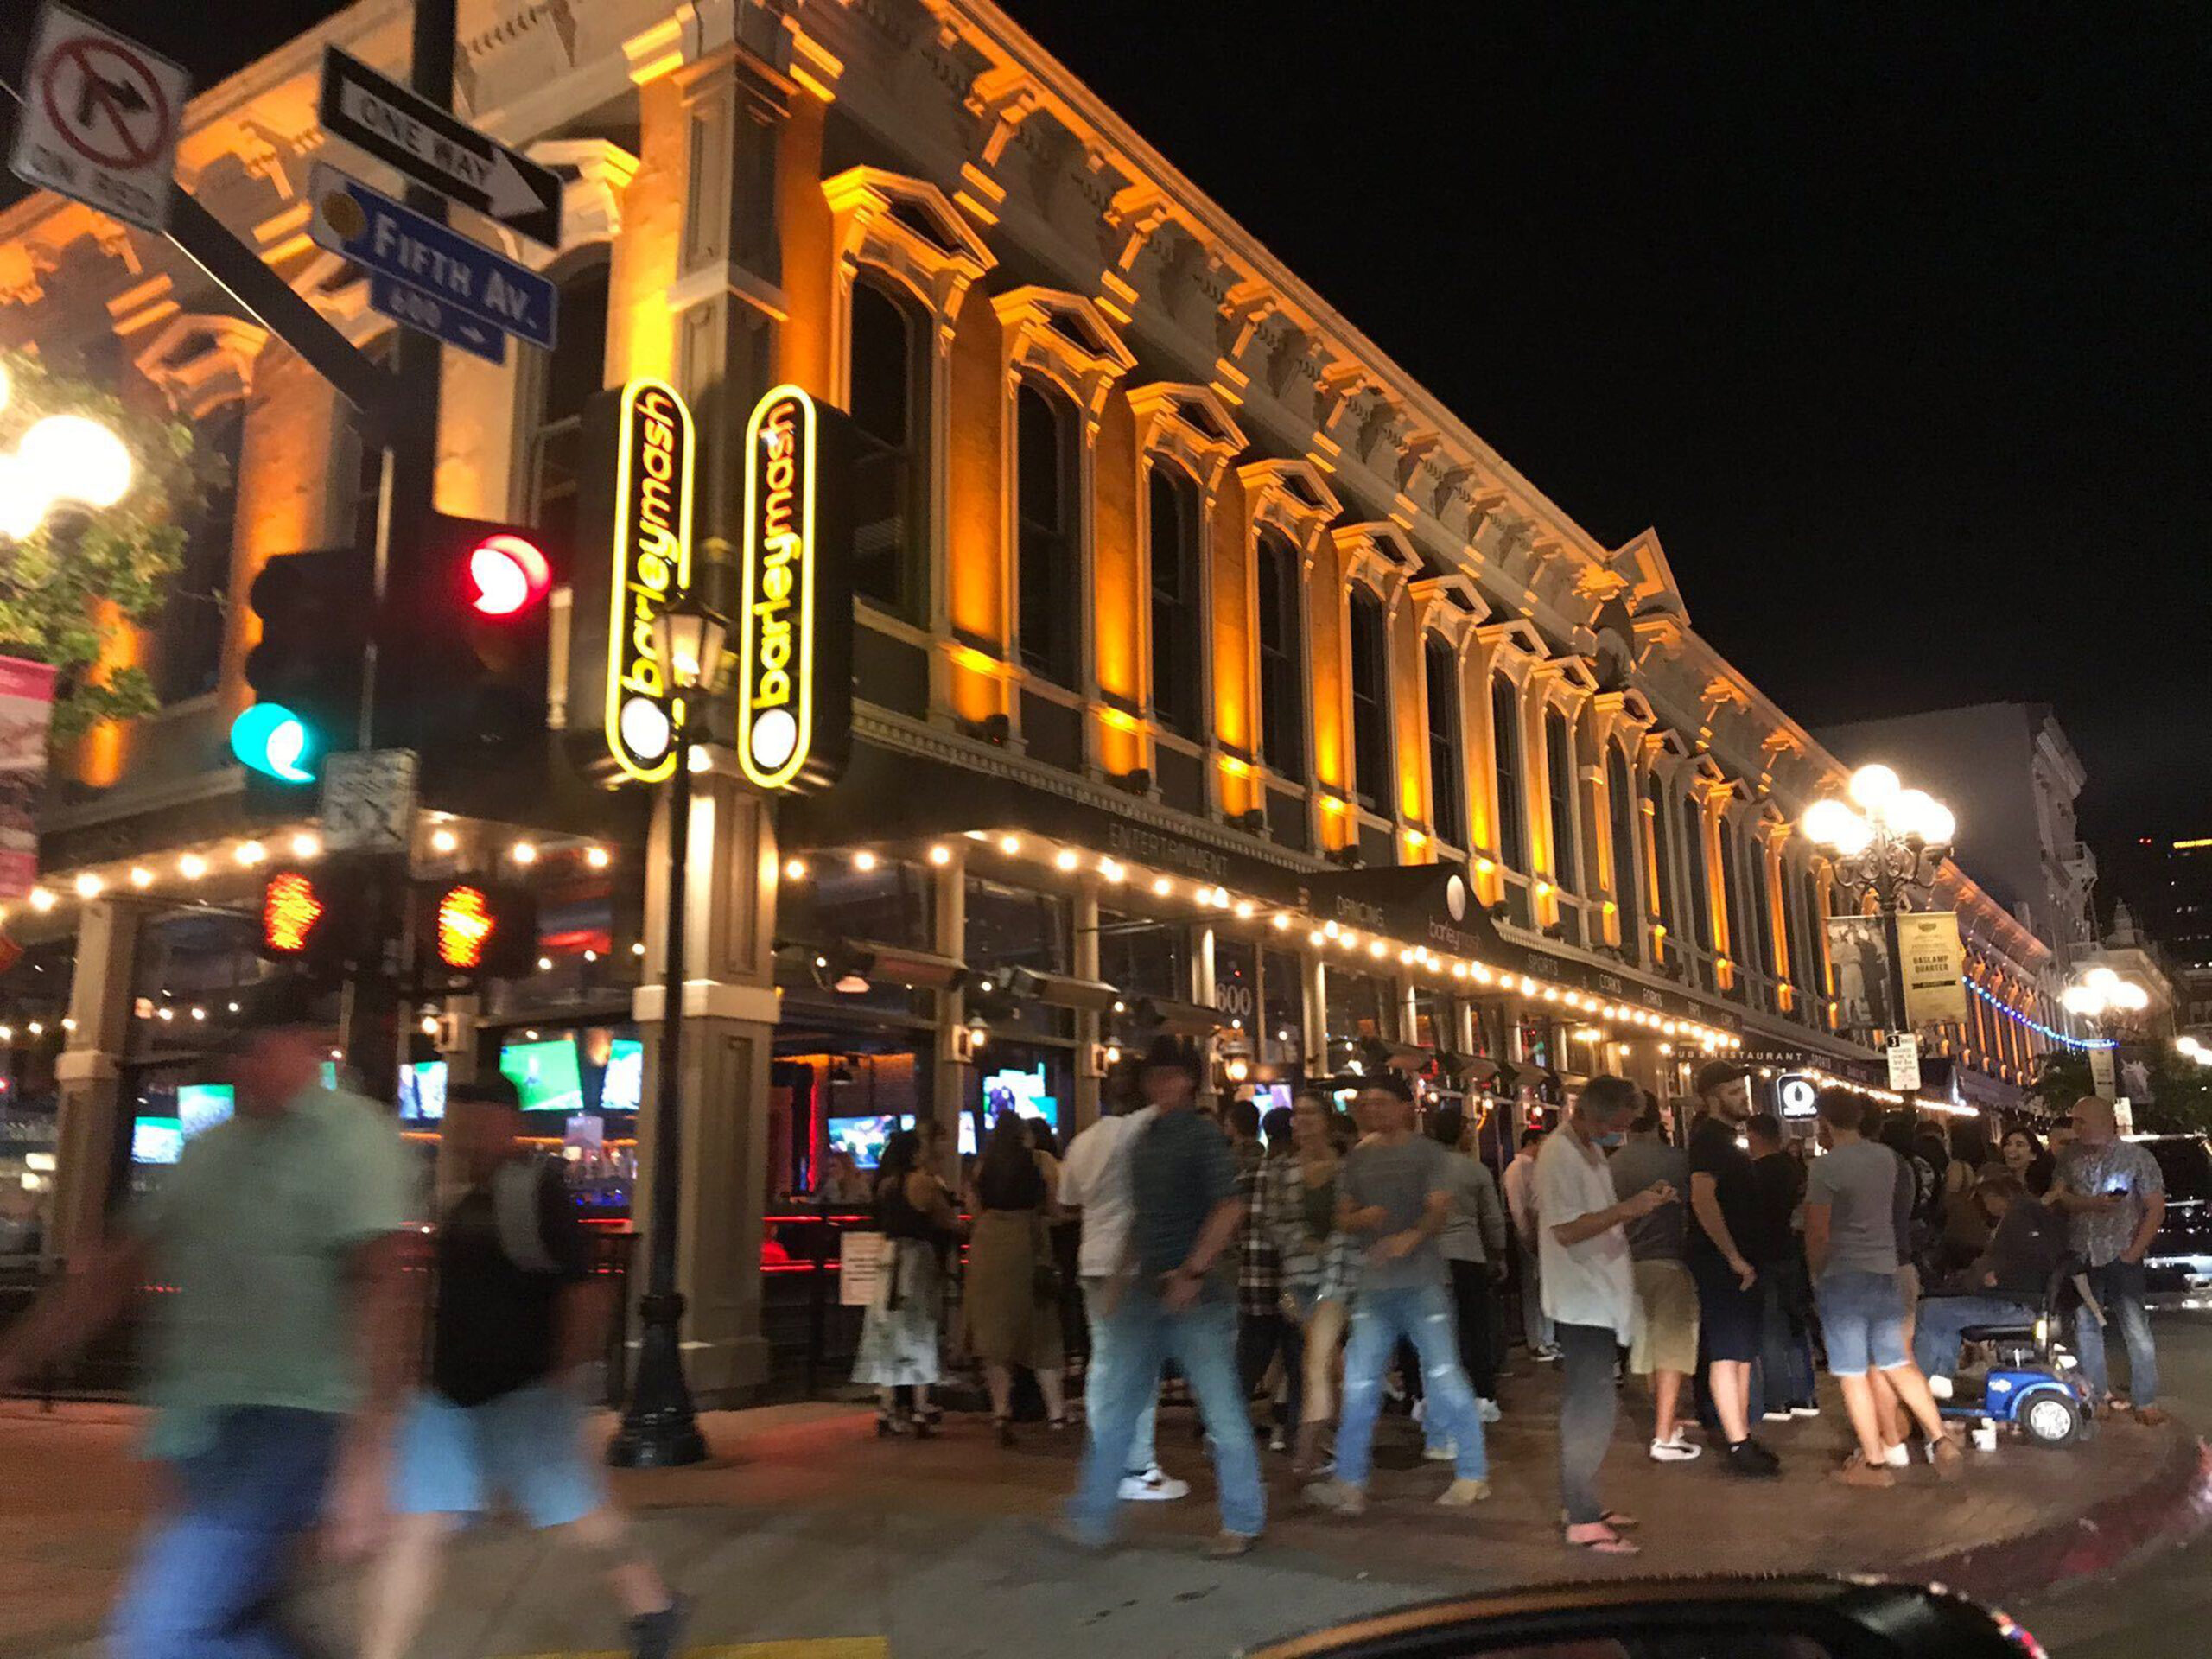 People walk around Gaslamp Quarter in at Fifth Ave. at night.